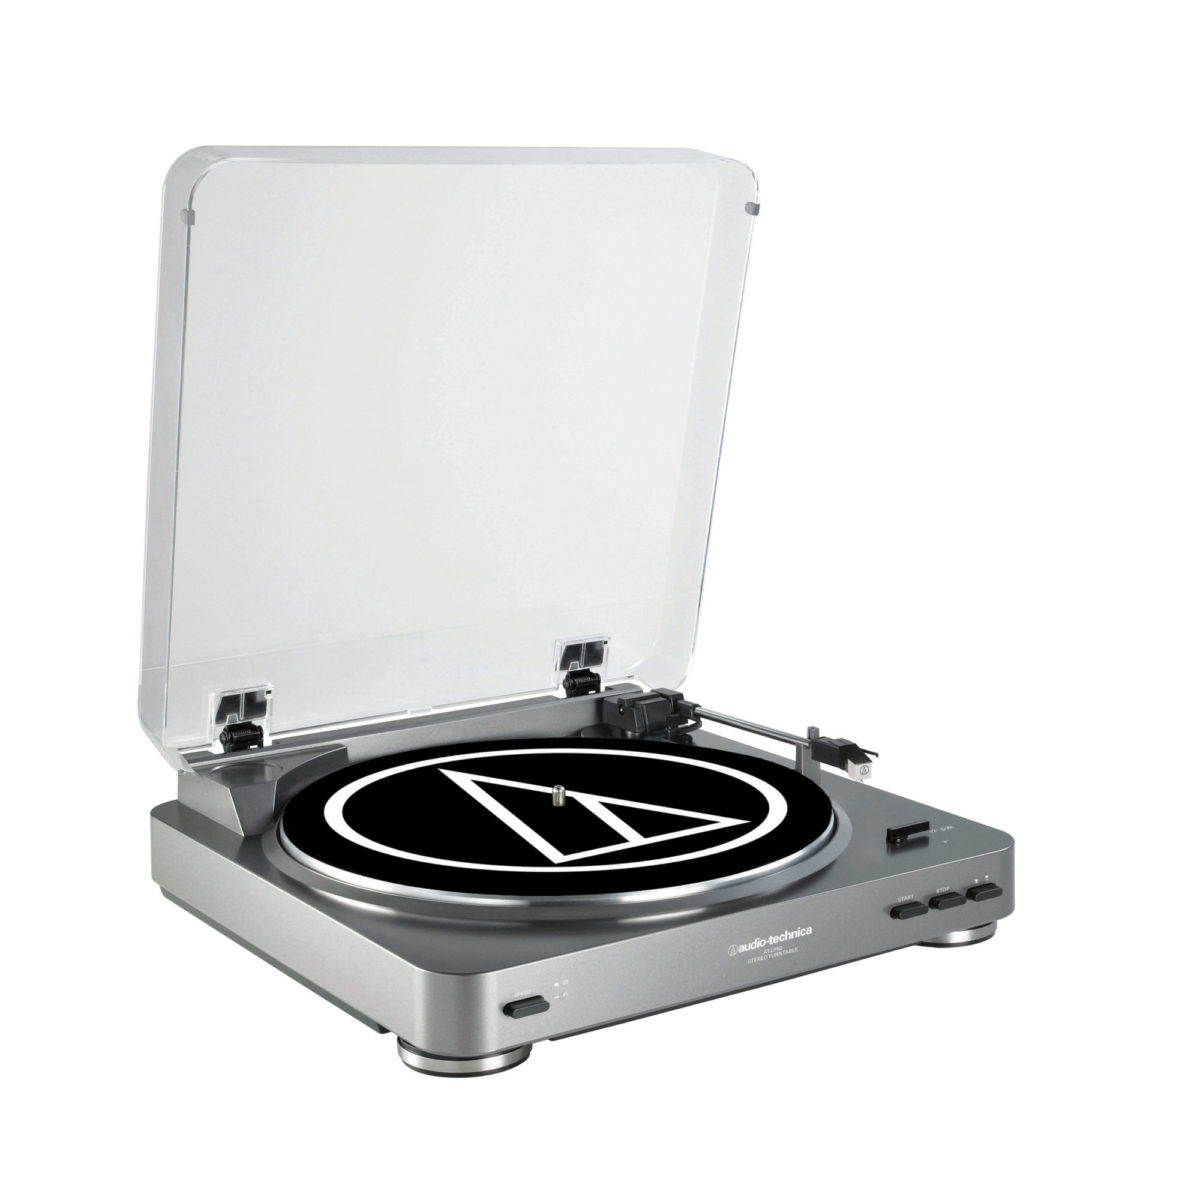 Audio-Technica AT-LP60 Fully Automatic Belt-Drive Stereo Turntable